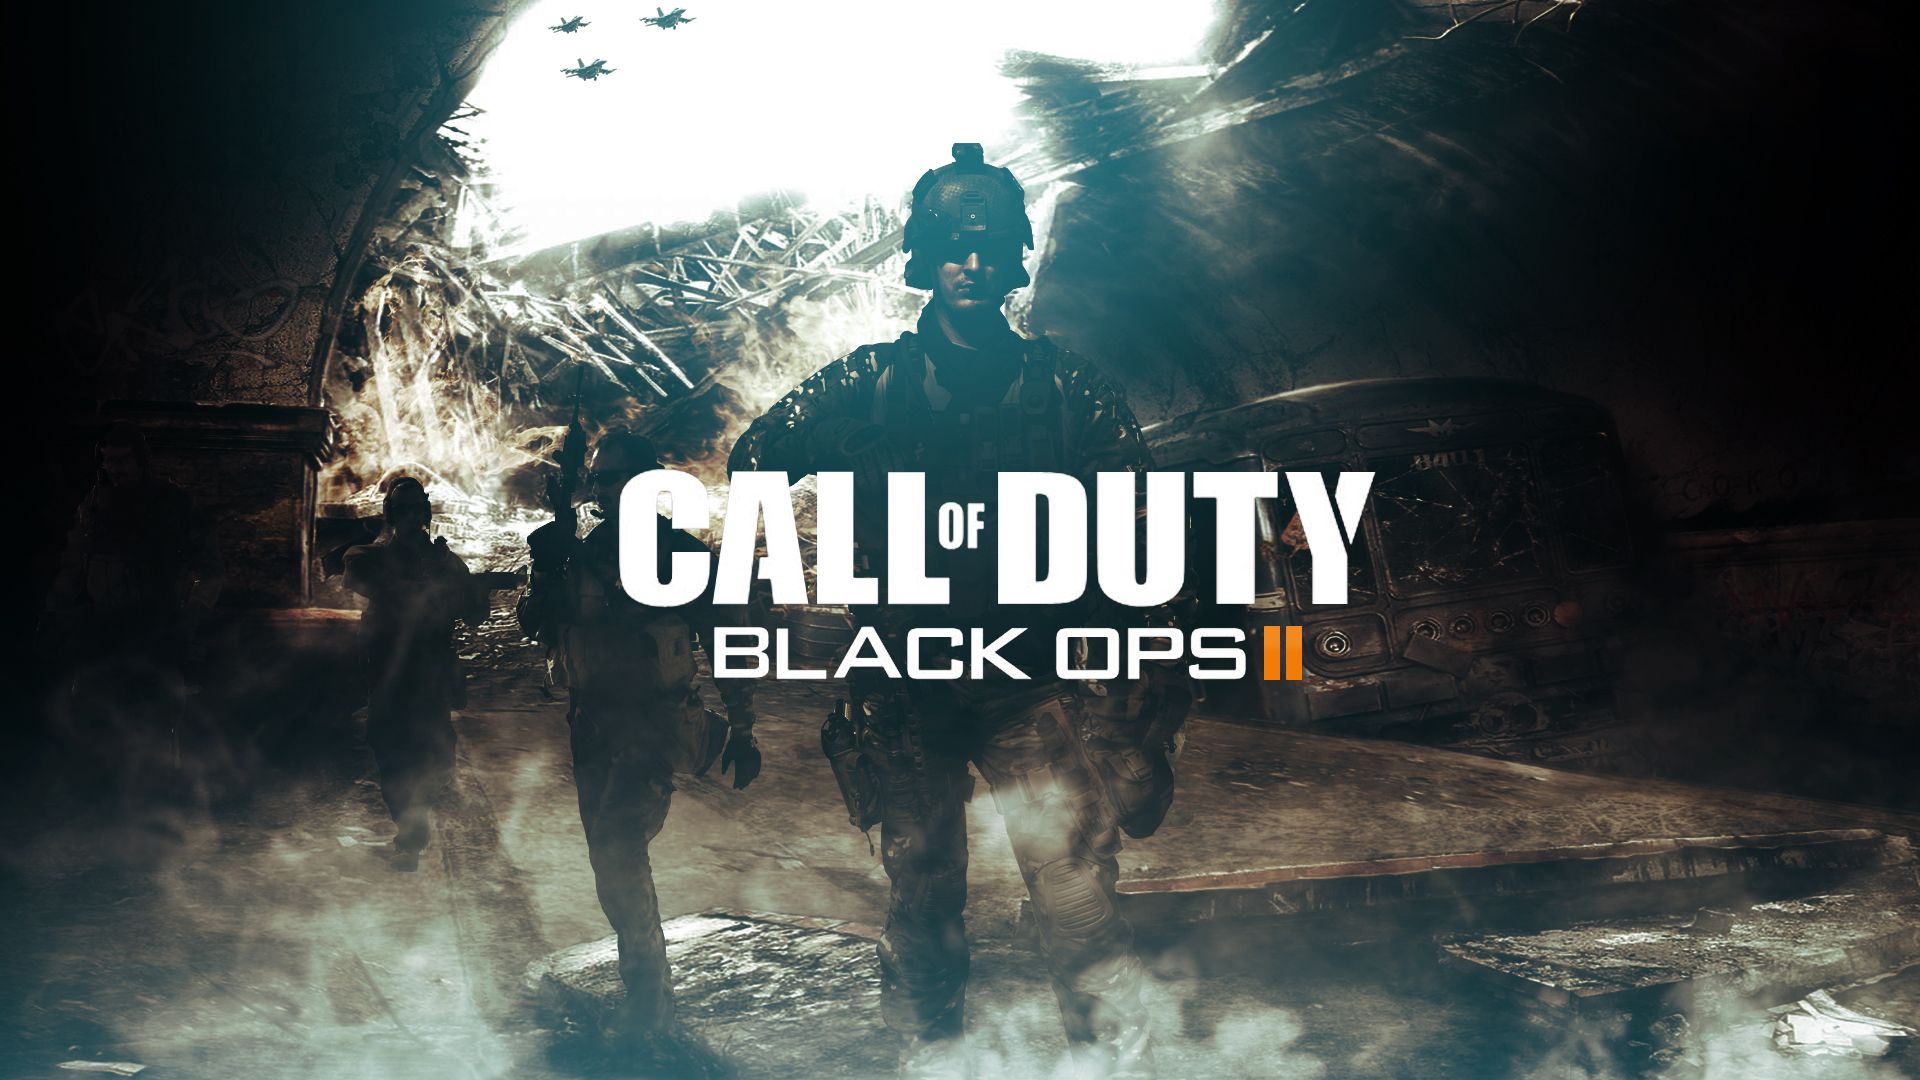 BO2] We are approaching the future. Black Ops 2 takes place in the year  2025; only two more years from now. : r/CallOfDuty